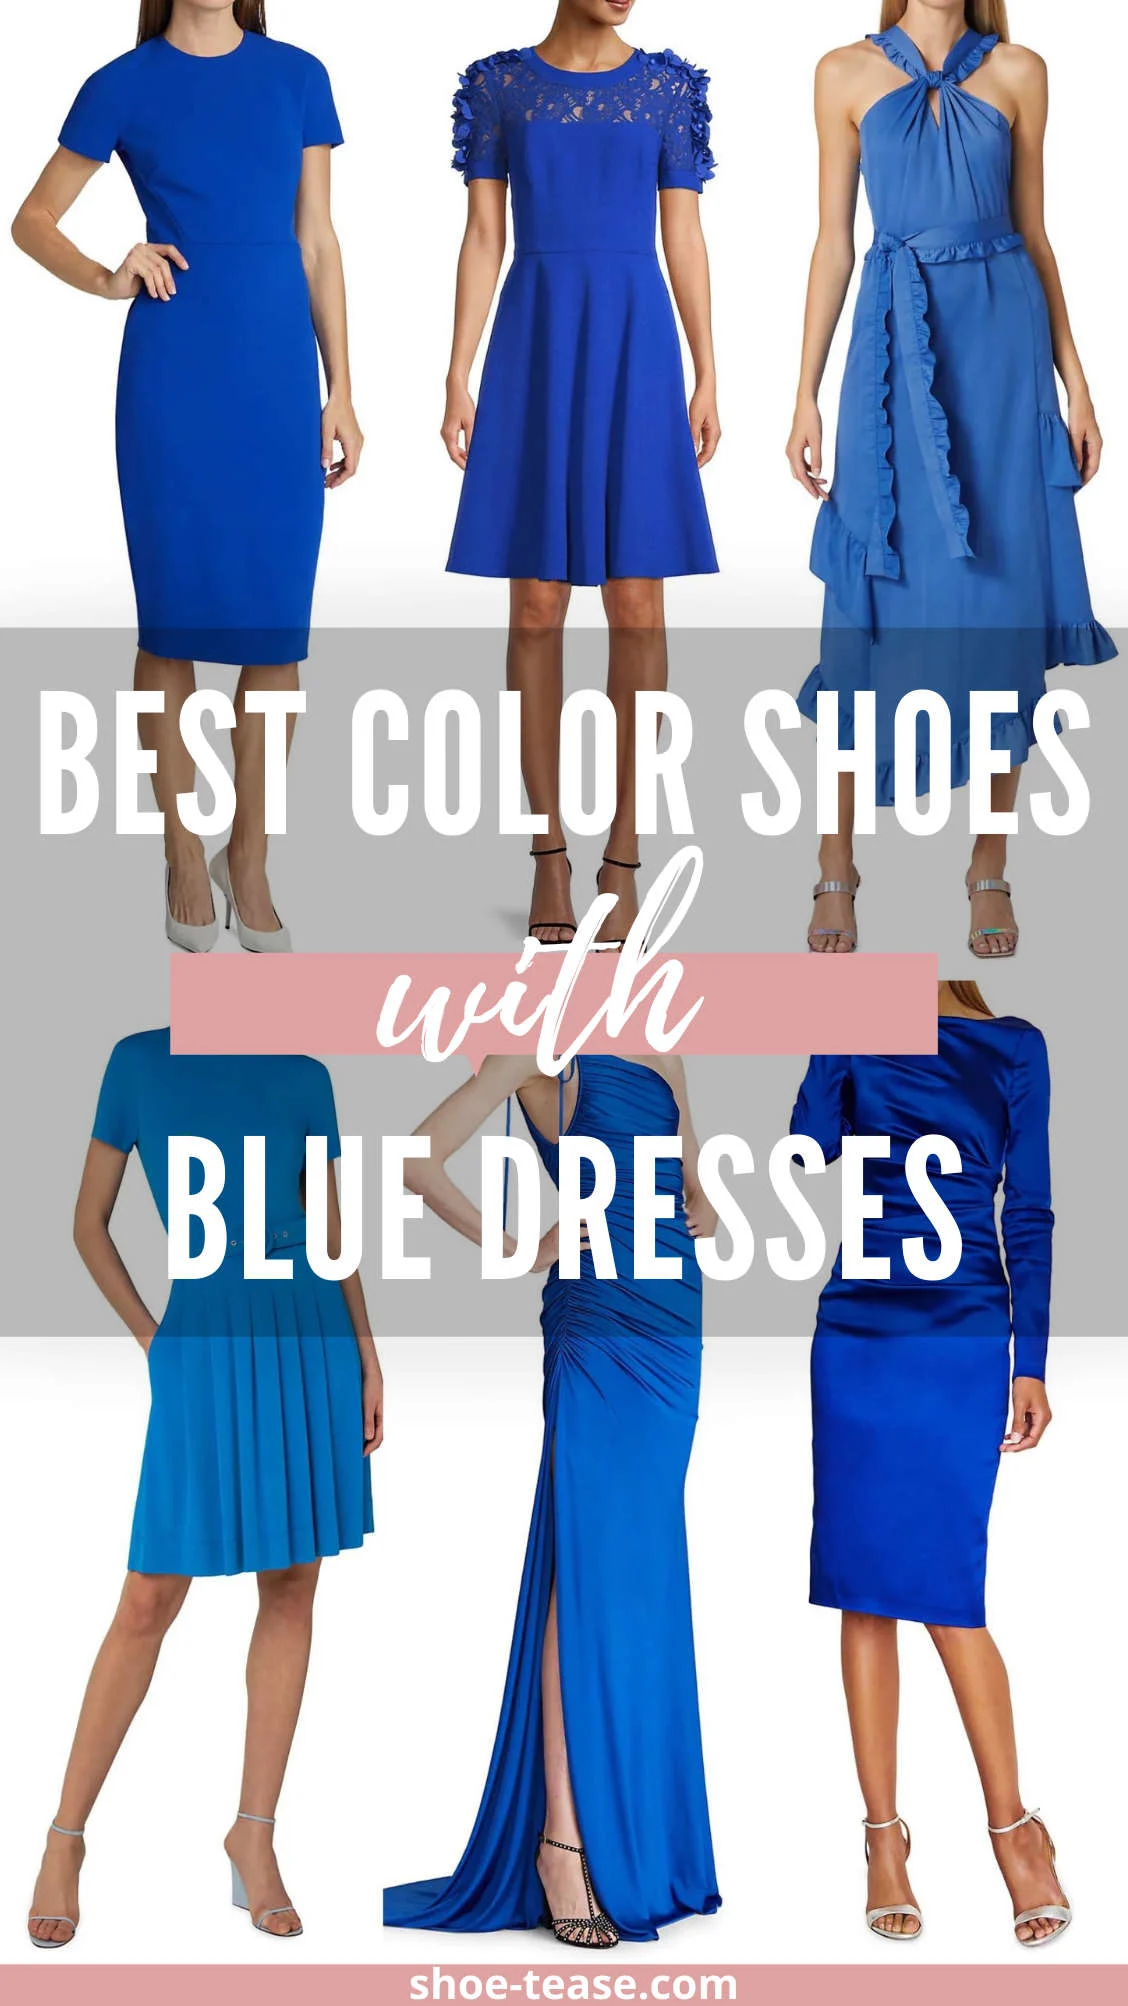 Showing you what color shoes for blue dresses & royal blue dresses look fab!